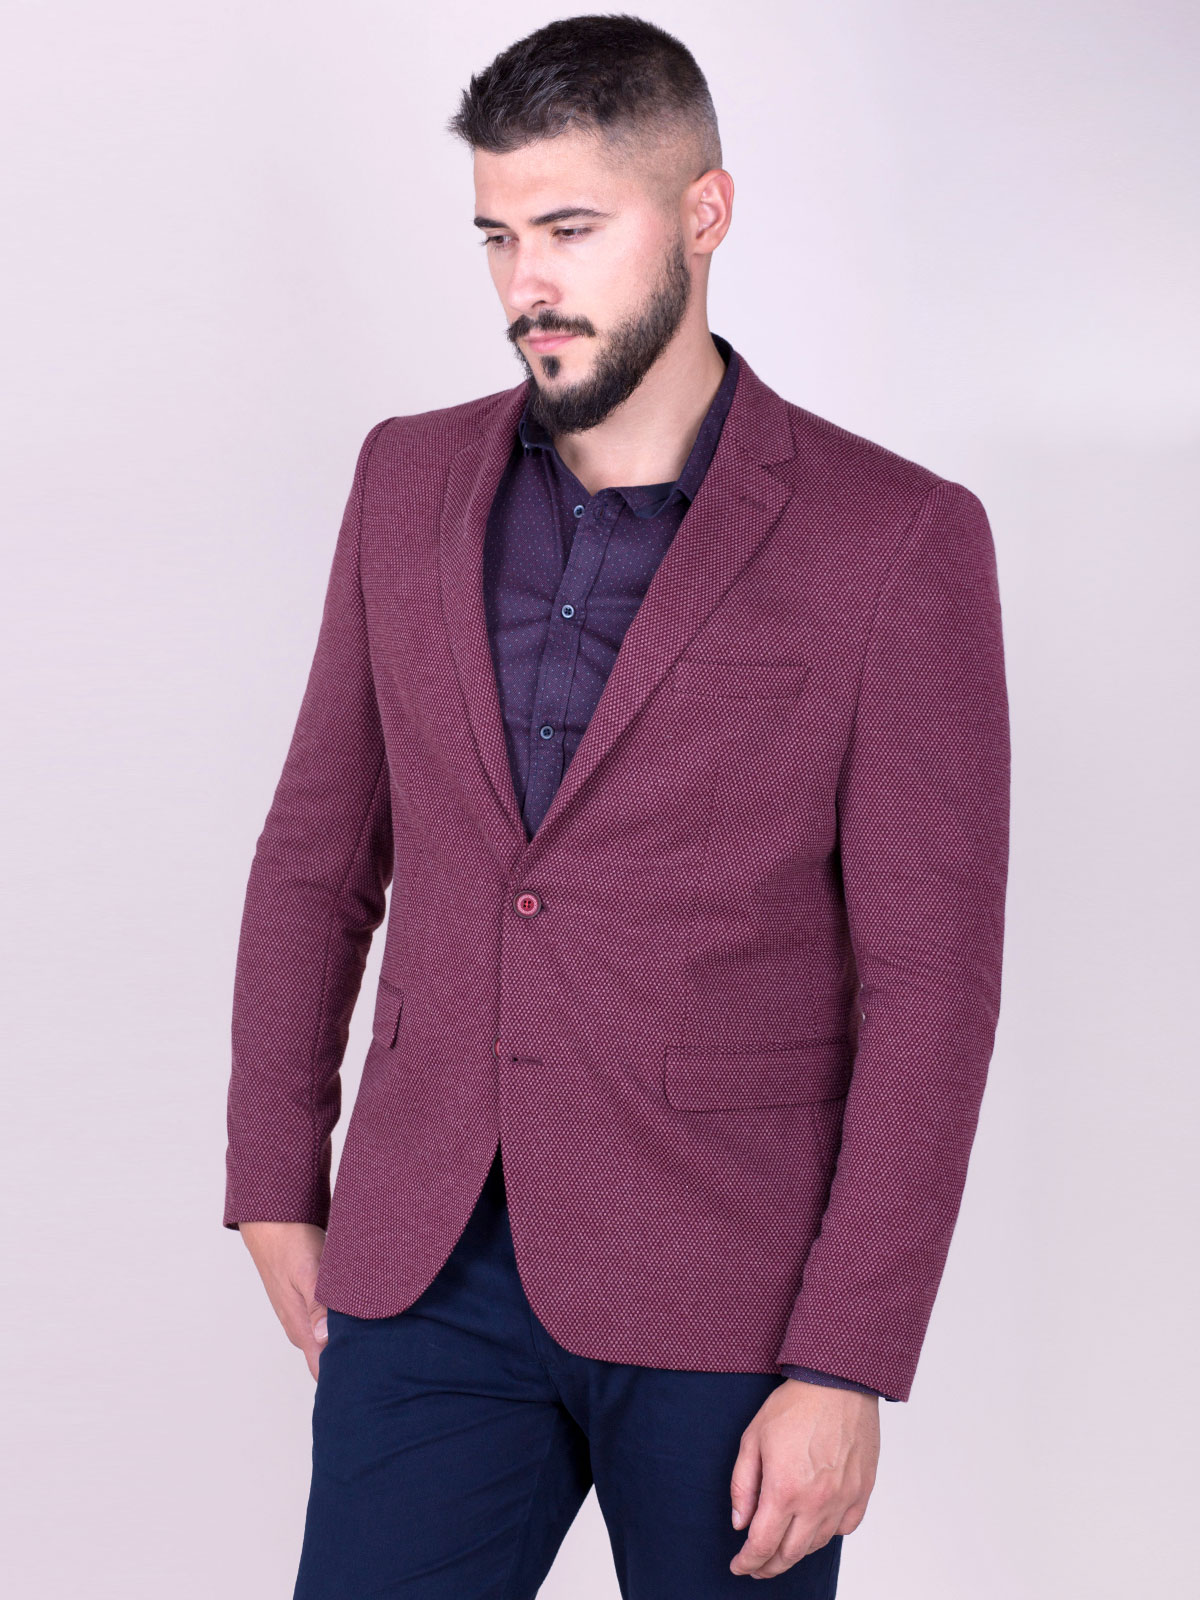 Jacket with armrests in raspberry color - 61073 € 50.06 img3